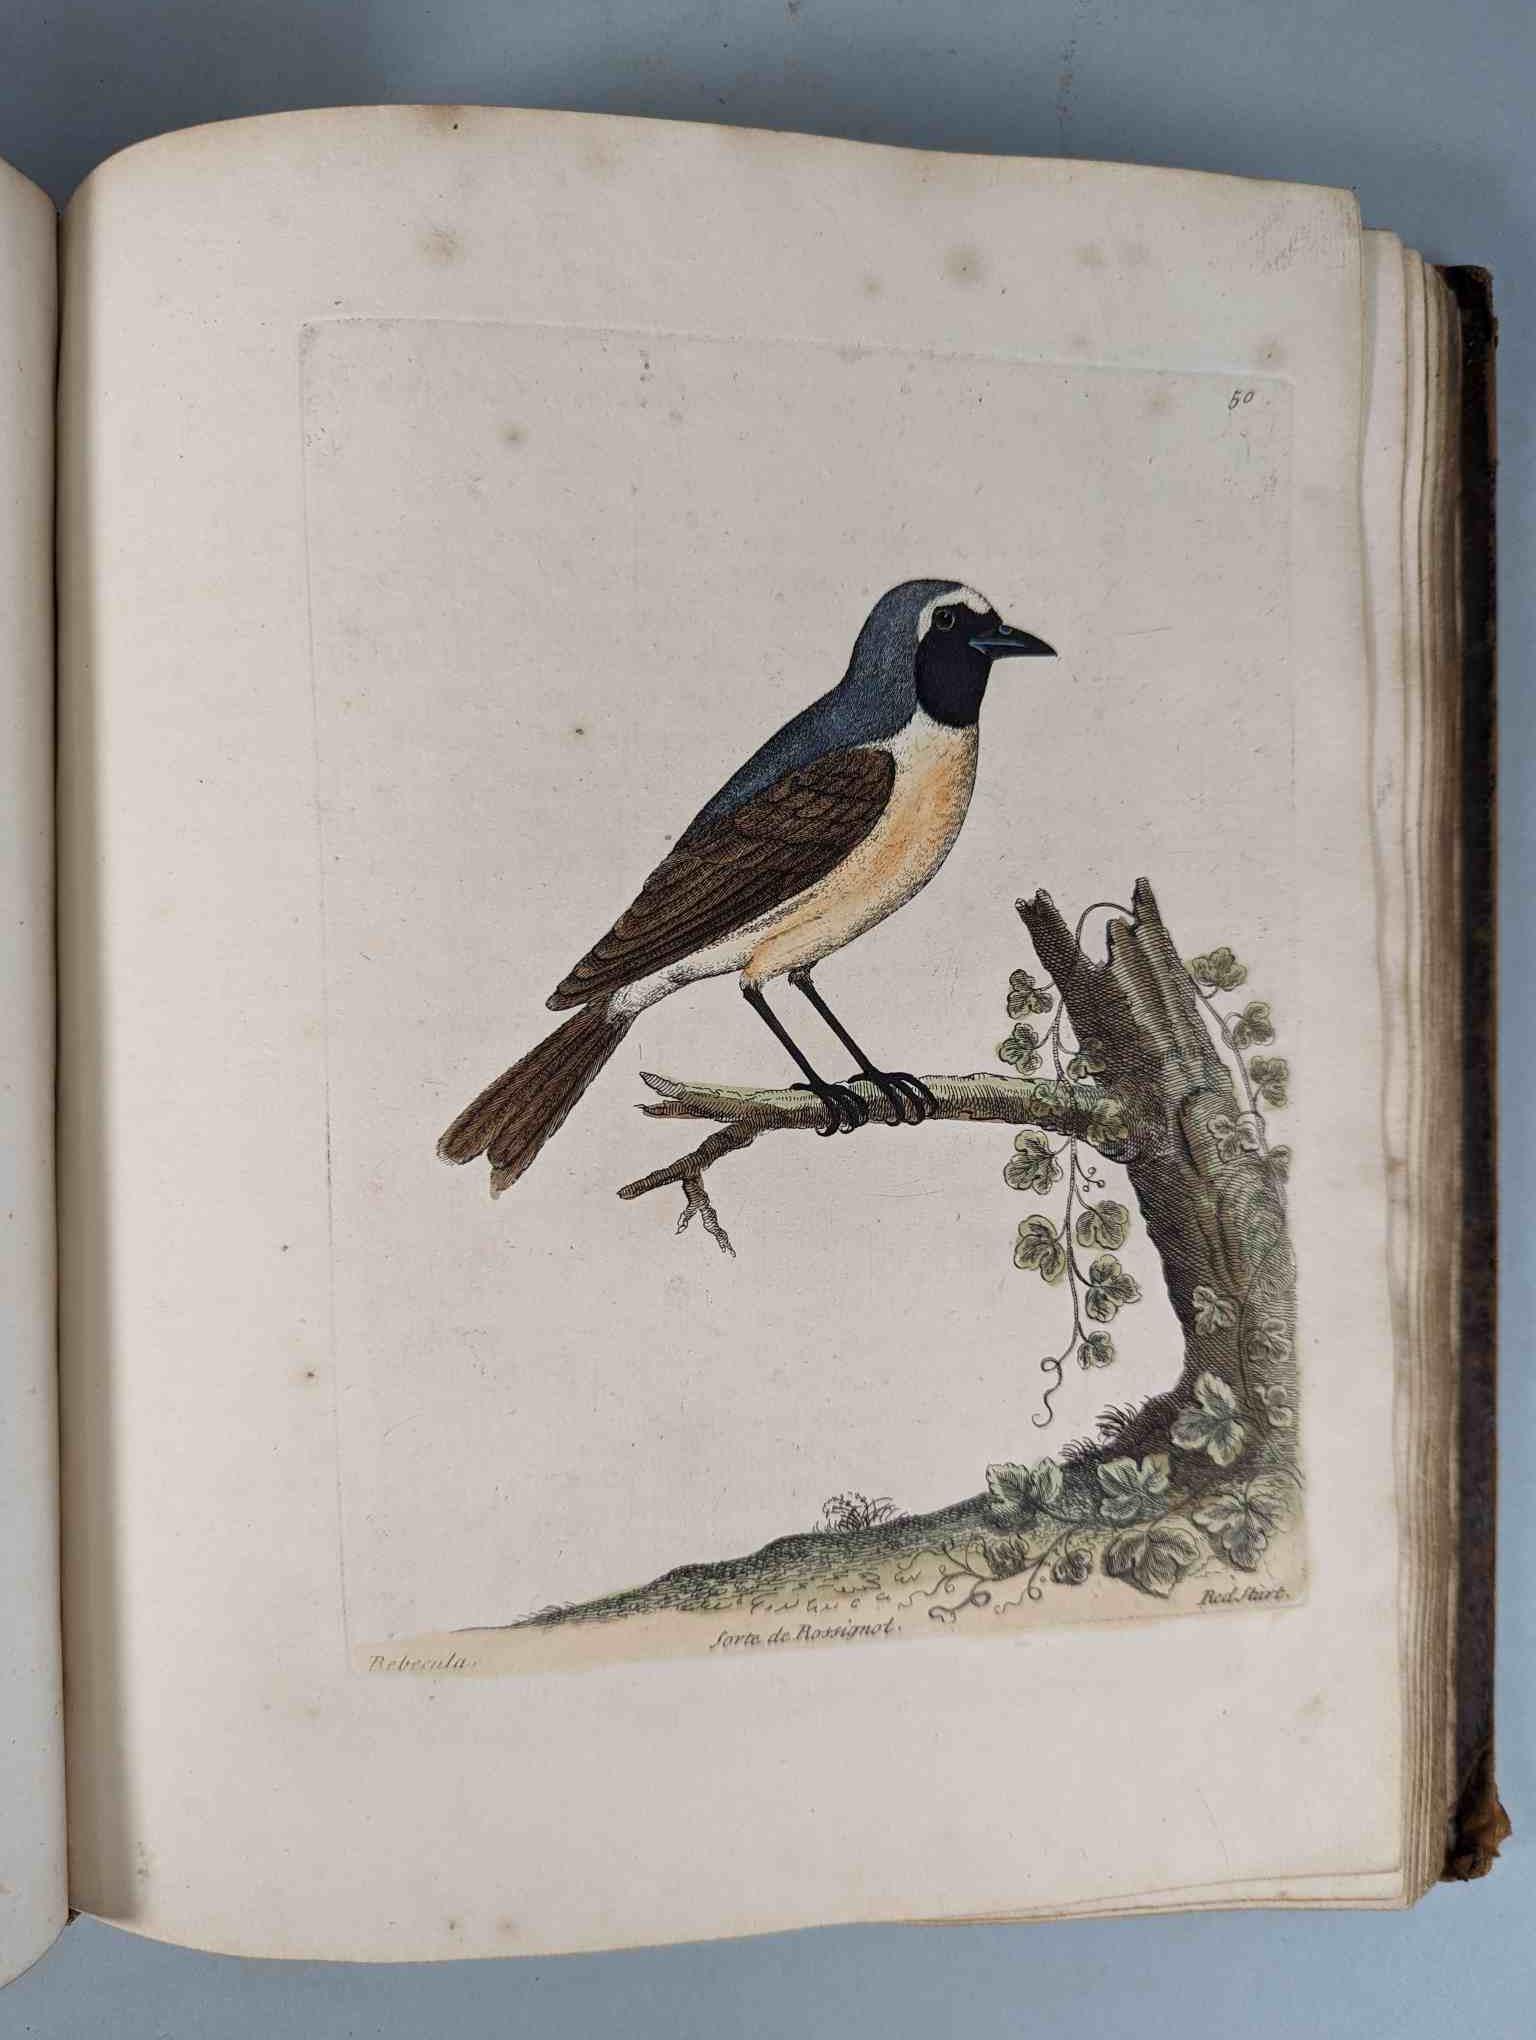 ALBIN, Eleazar. A Natural History of Birds, to which are added, Notes and Observations by W. - Image 53 of 208